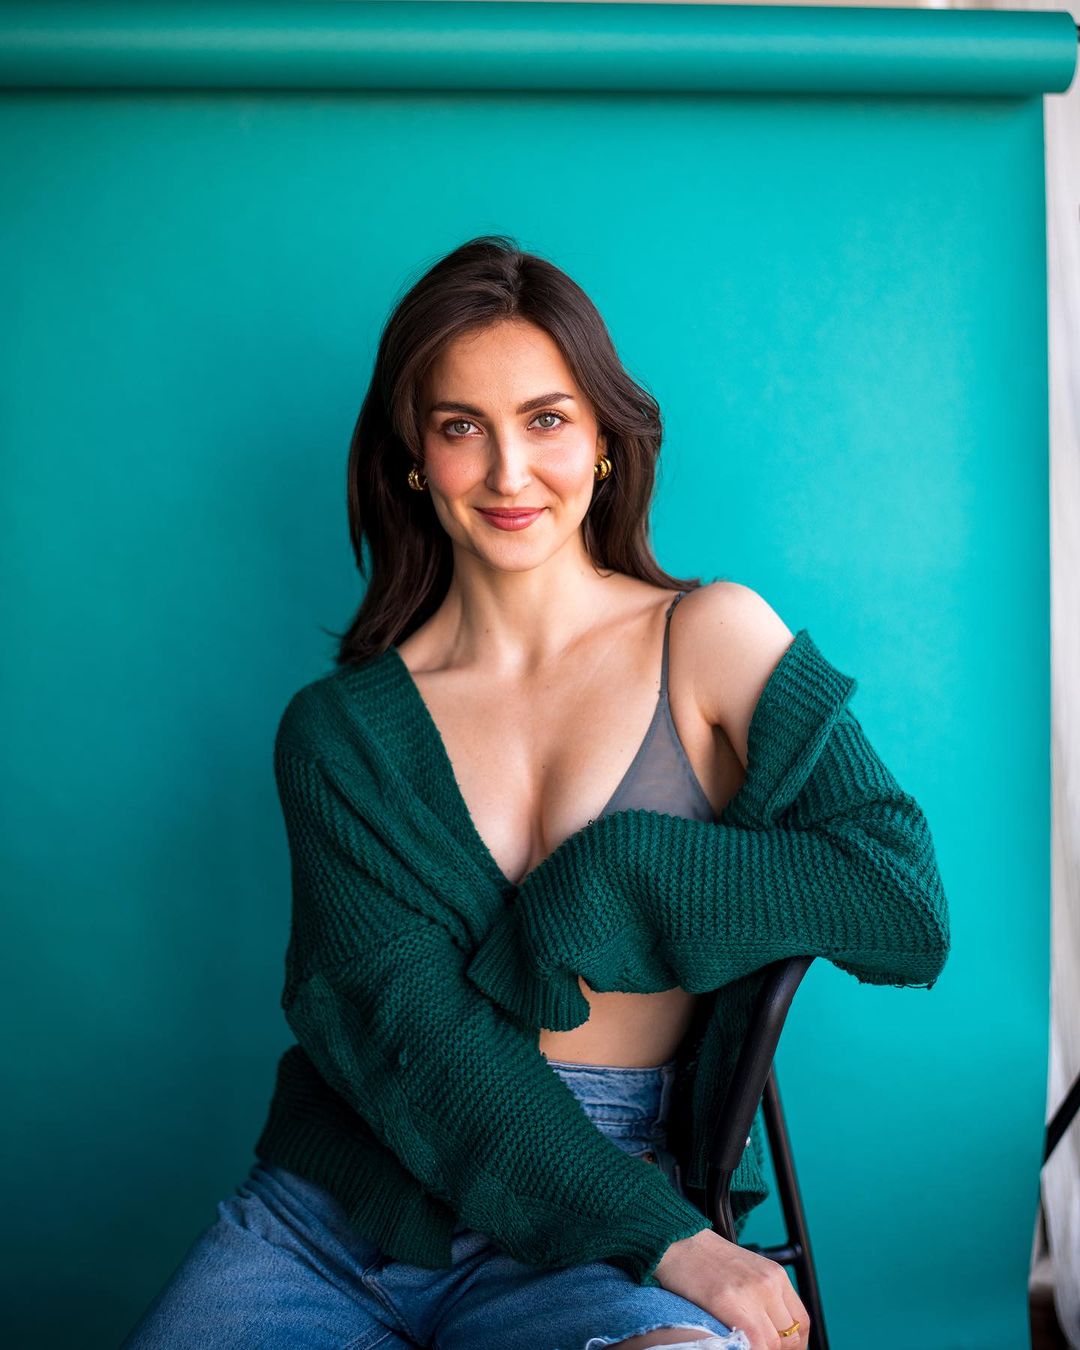 HINDI ACTRESS ELLI AVRRAM IMAGES IN GREEN TOP BLUE JEANS 3